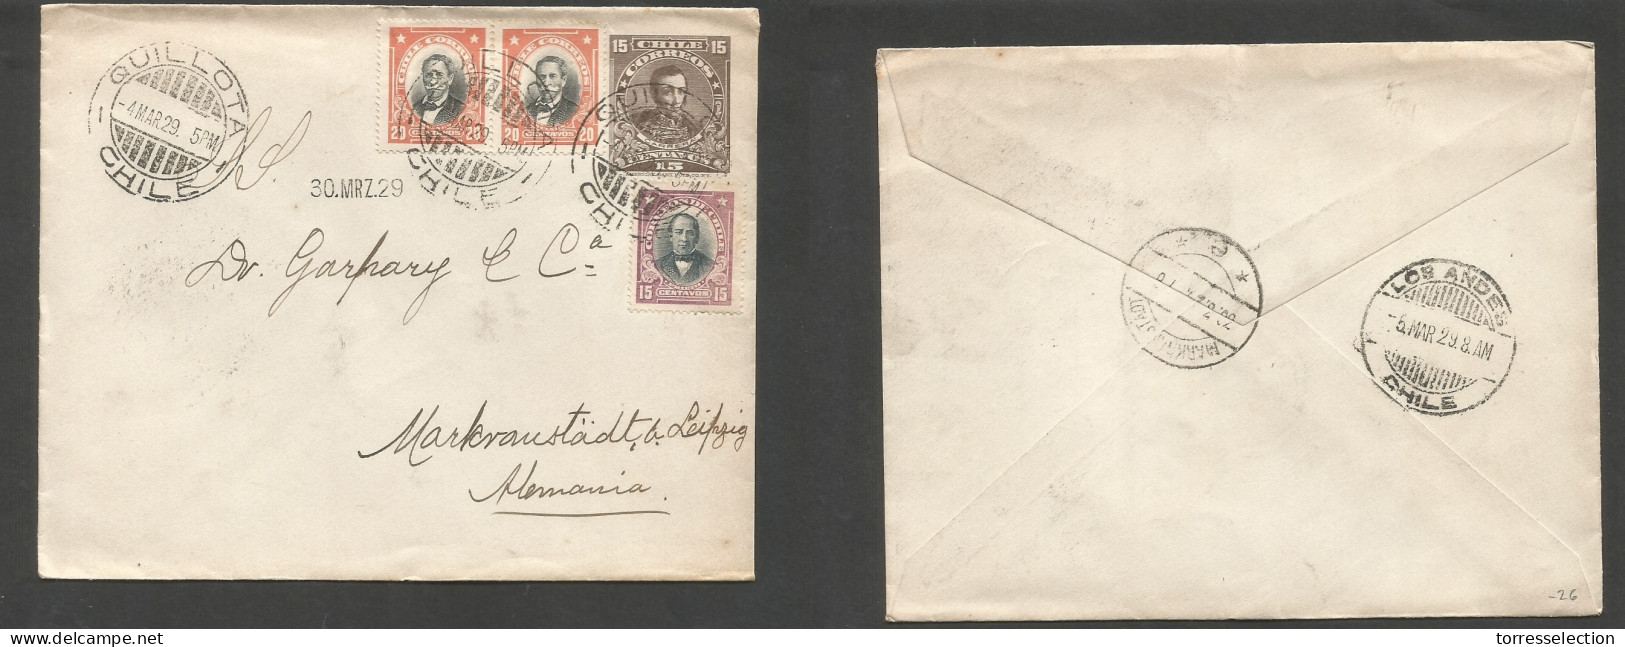 CHILE - Stationery. 1929 (4 March) Quillota - Germany, Mankvanstadt (30 March) 15c Brown + 3 Adtls Stat Env, Cds At 70c  - Chile